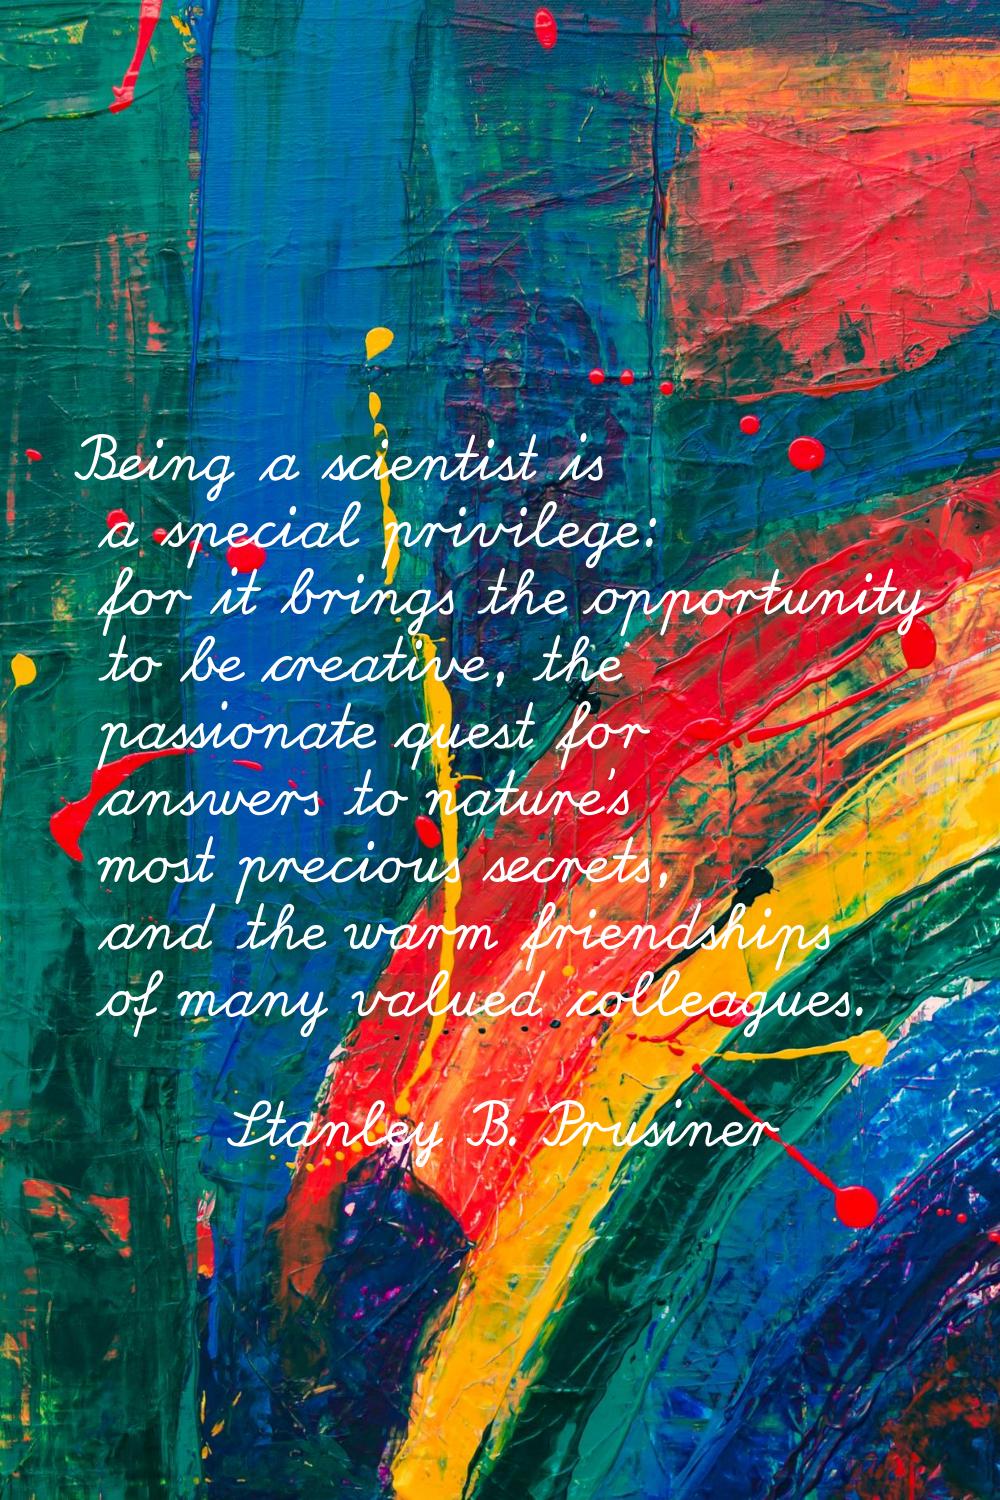 Being a scientist is a special privilege: for it brings the opportunity to be creative, the passion